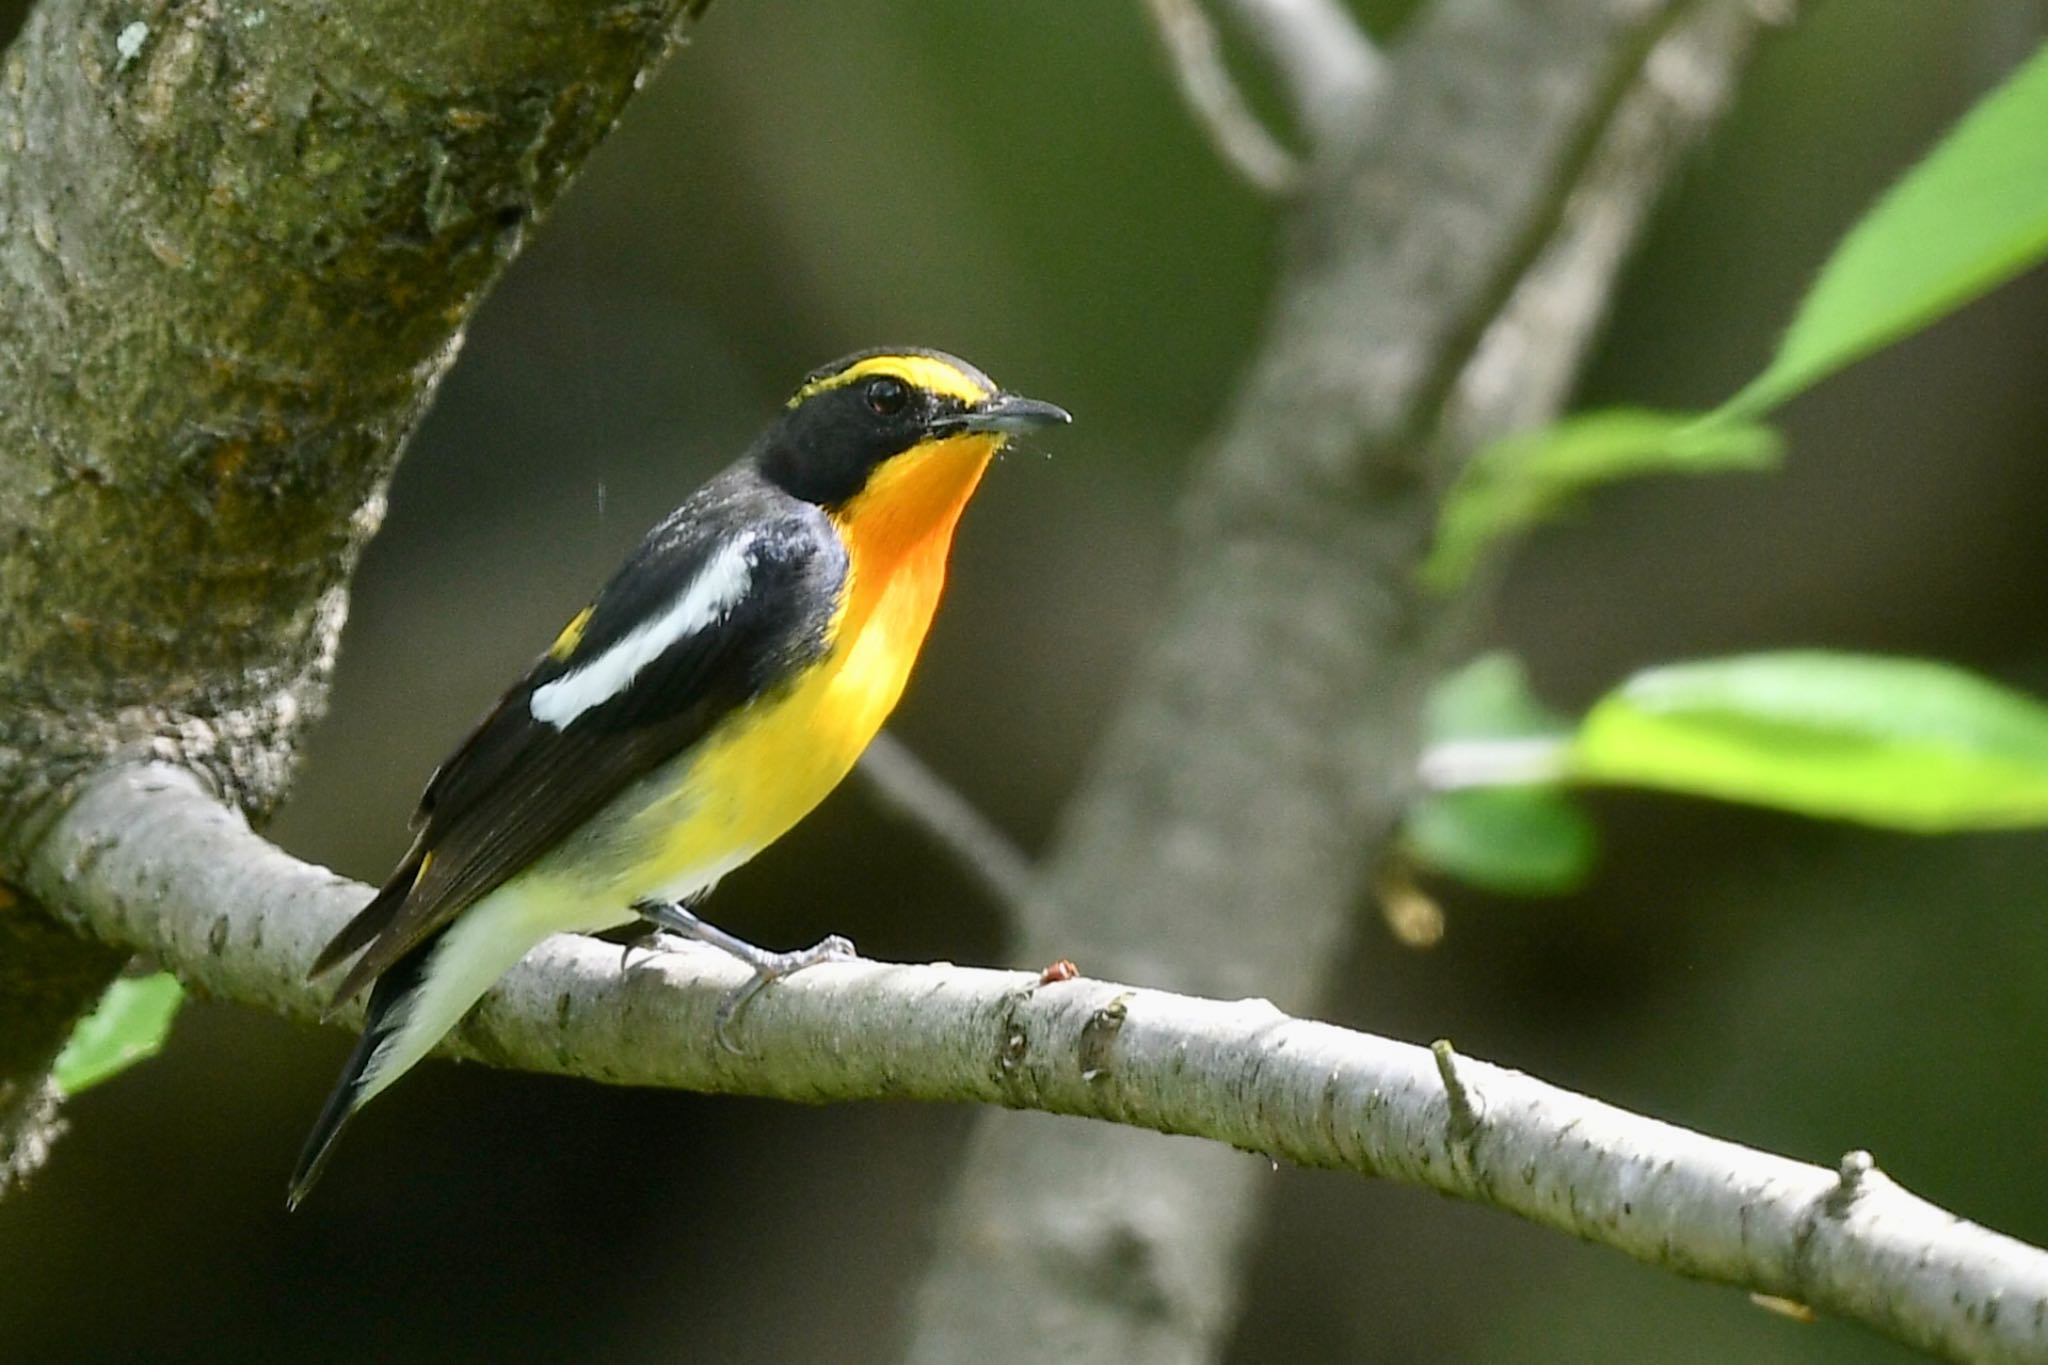 Photo of Narcissus Flycatcher at 福岡県福岡市 by にょろちょろ